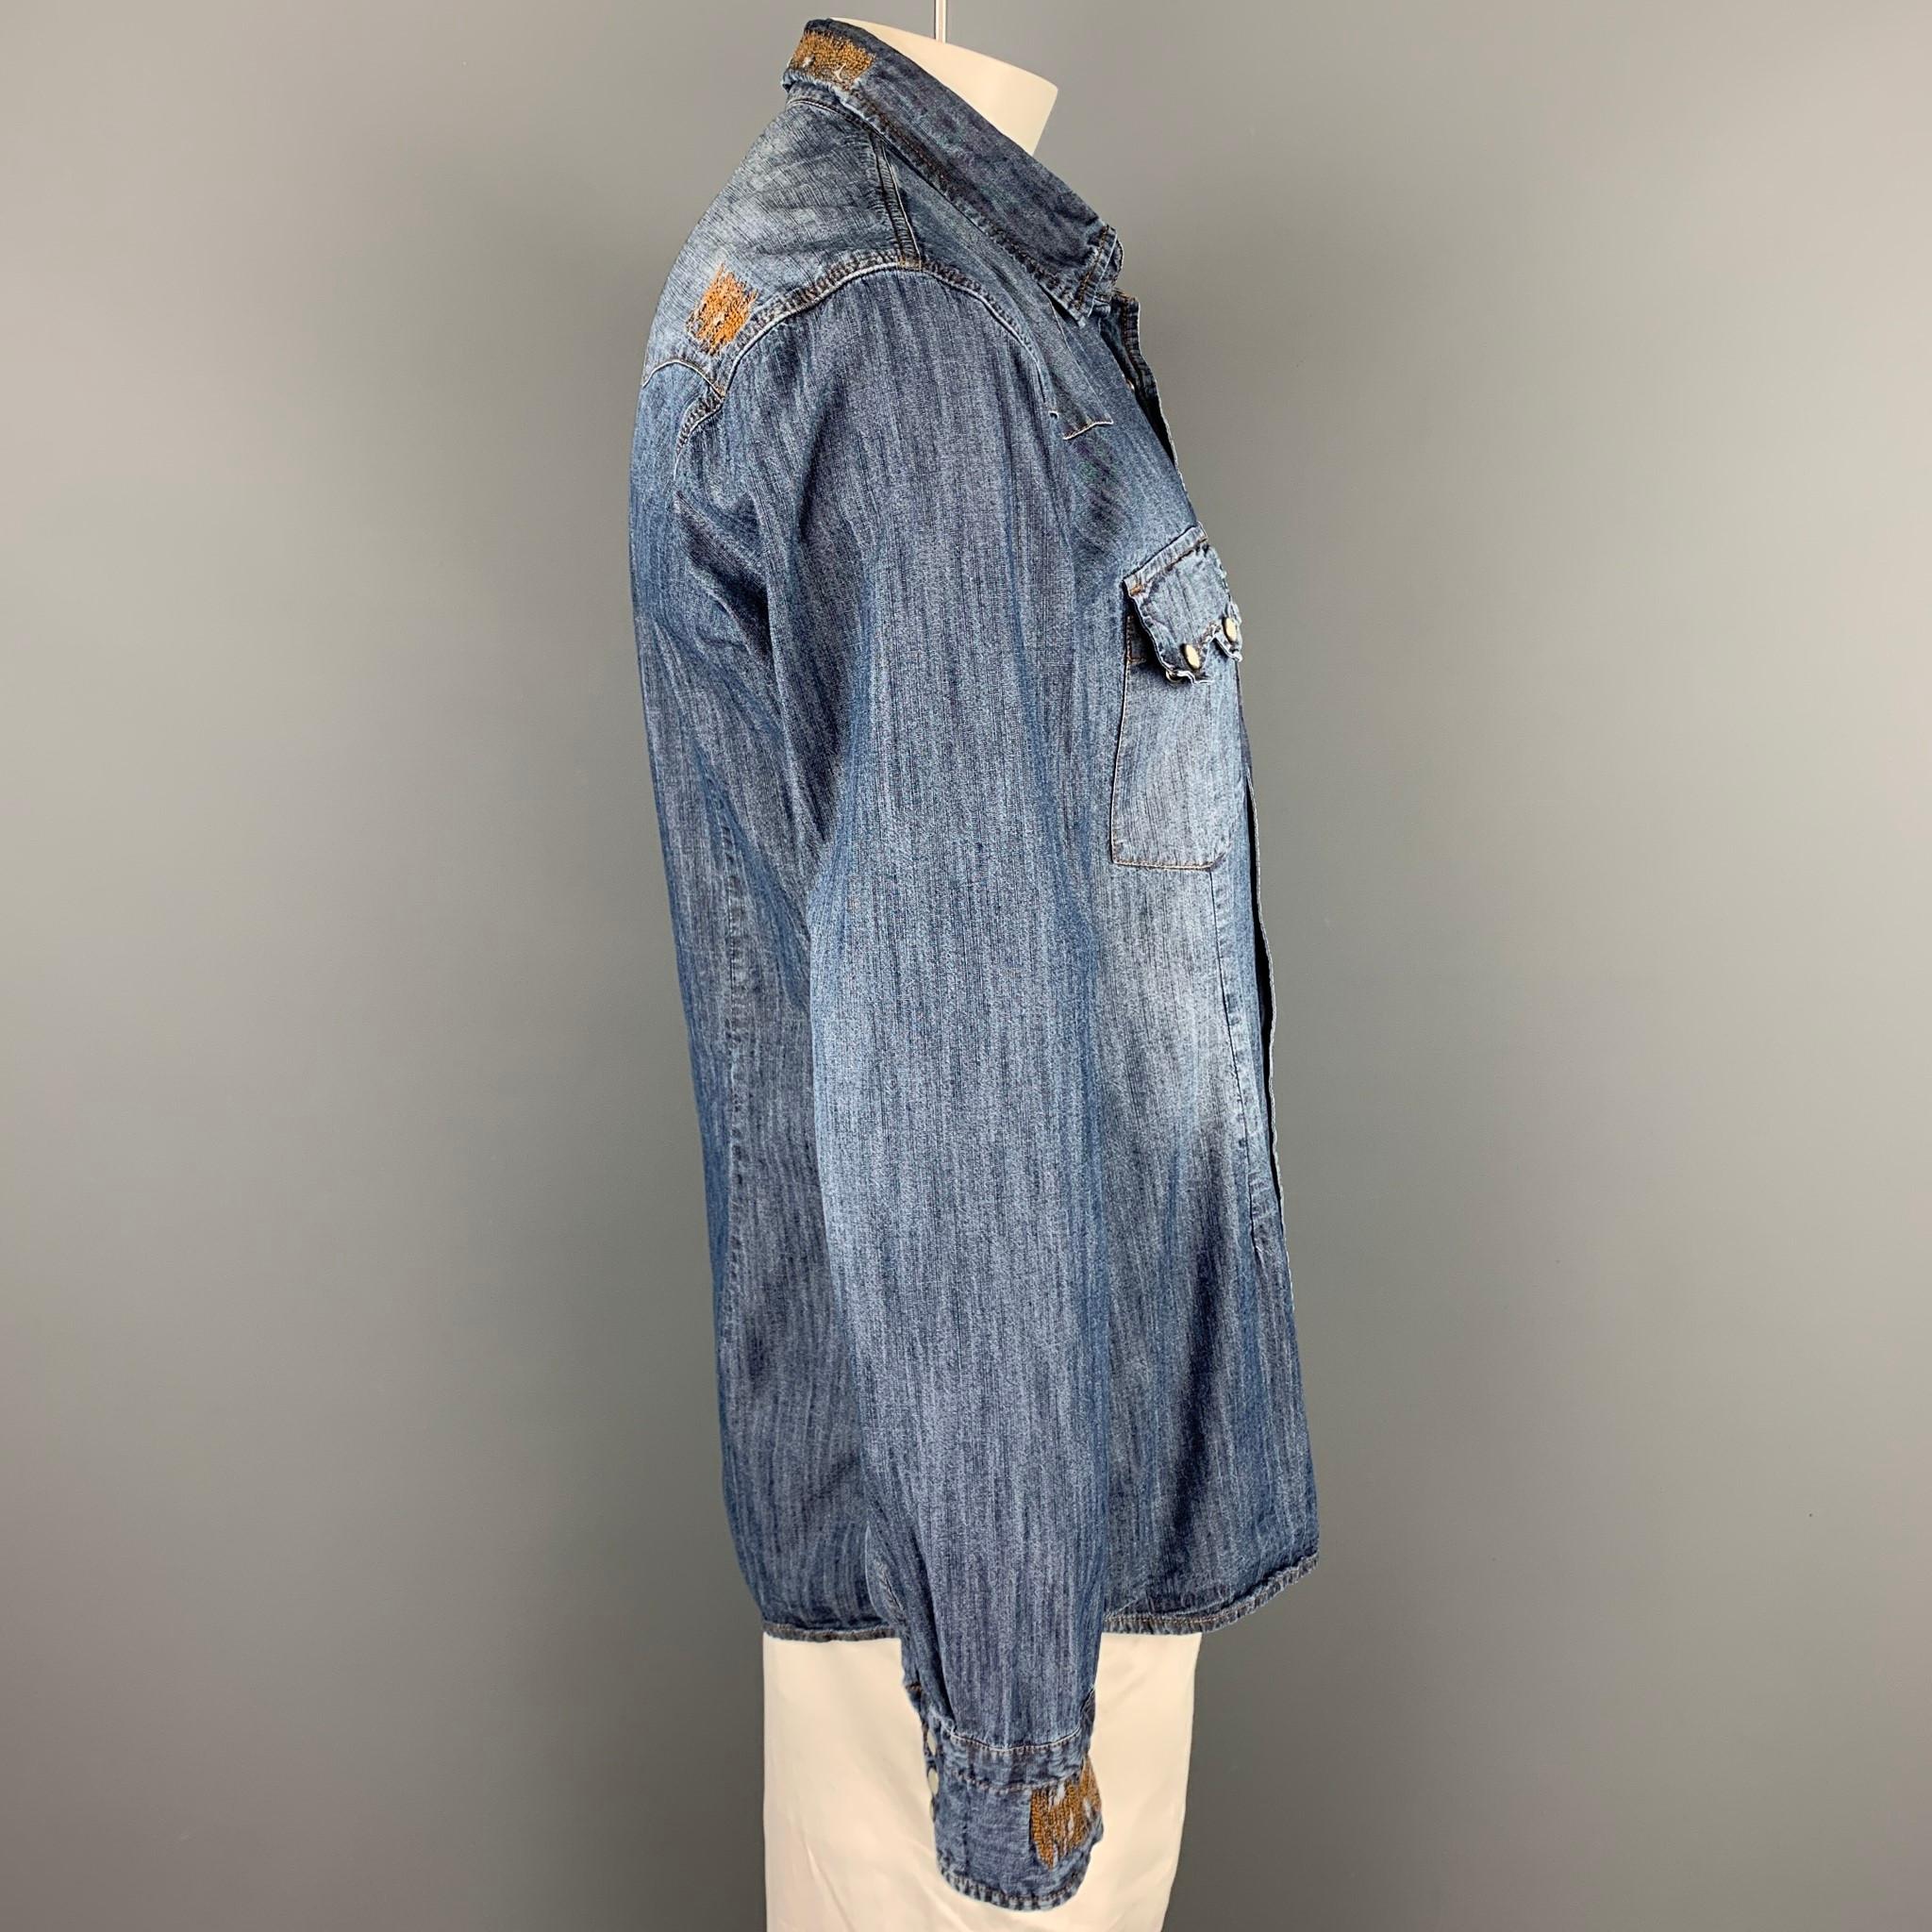 DANIELE ALESSANDRINI long sleeve shirt comes in a indigo material with contrast stitching featuring a button up style, mother of pearl buttons, back patch detail, and a spread collar. 

Very Good Pre-Owned Condition.
Marked: